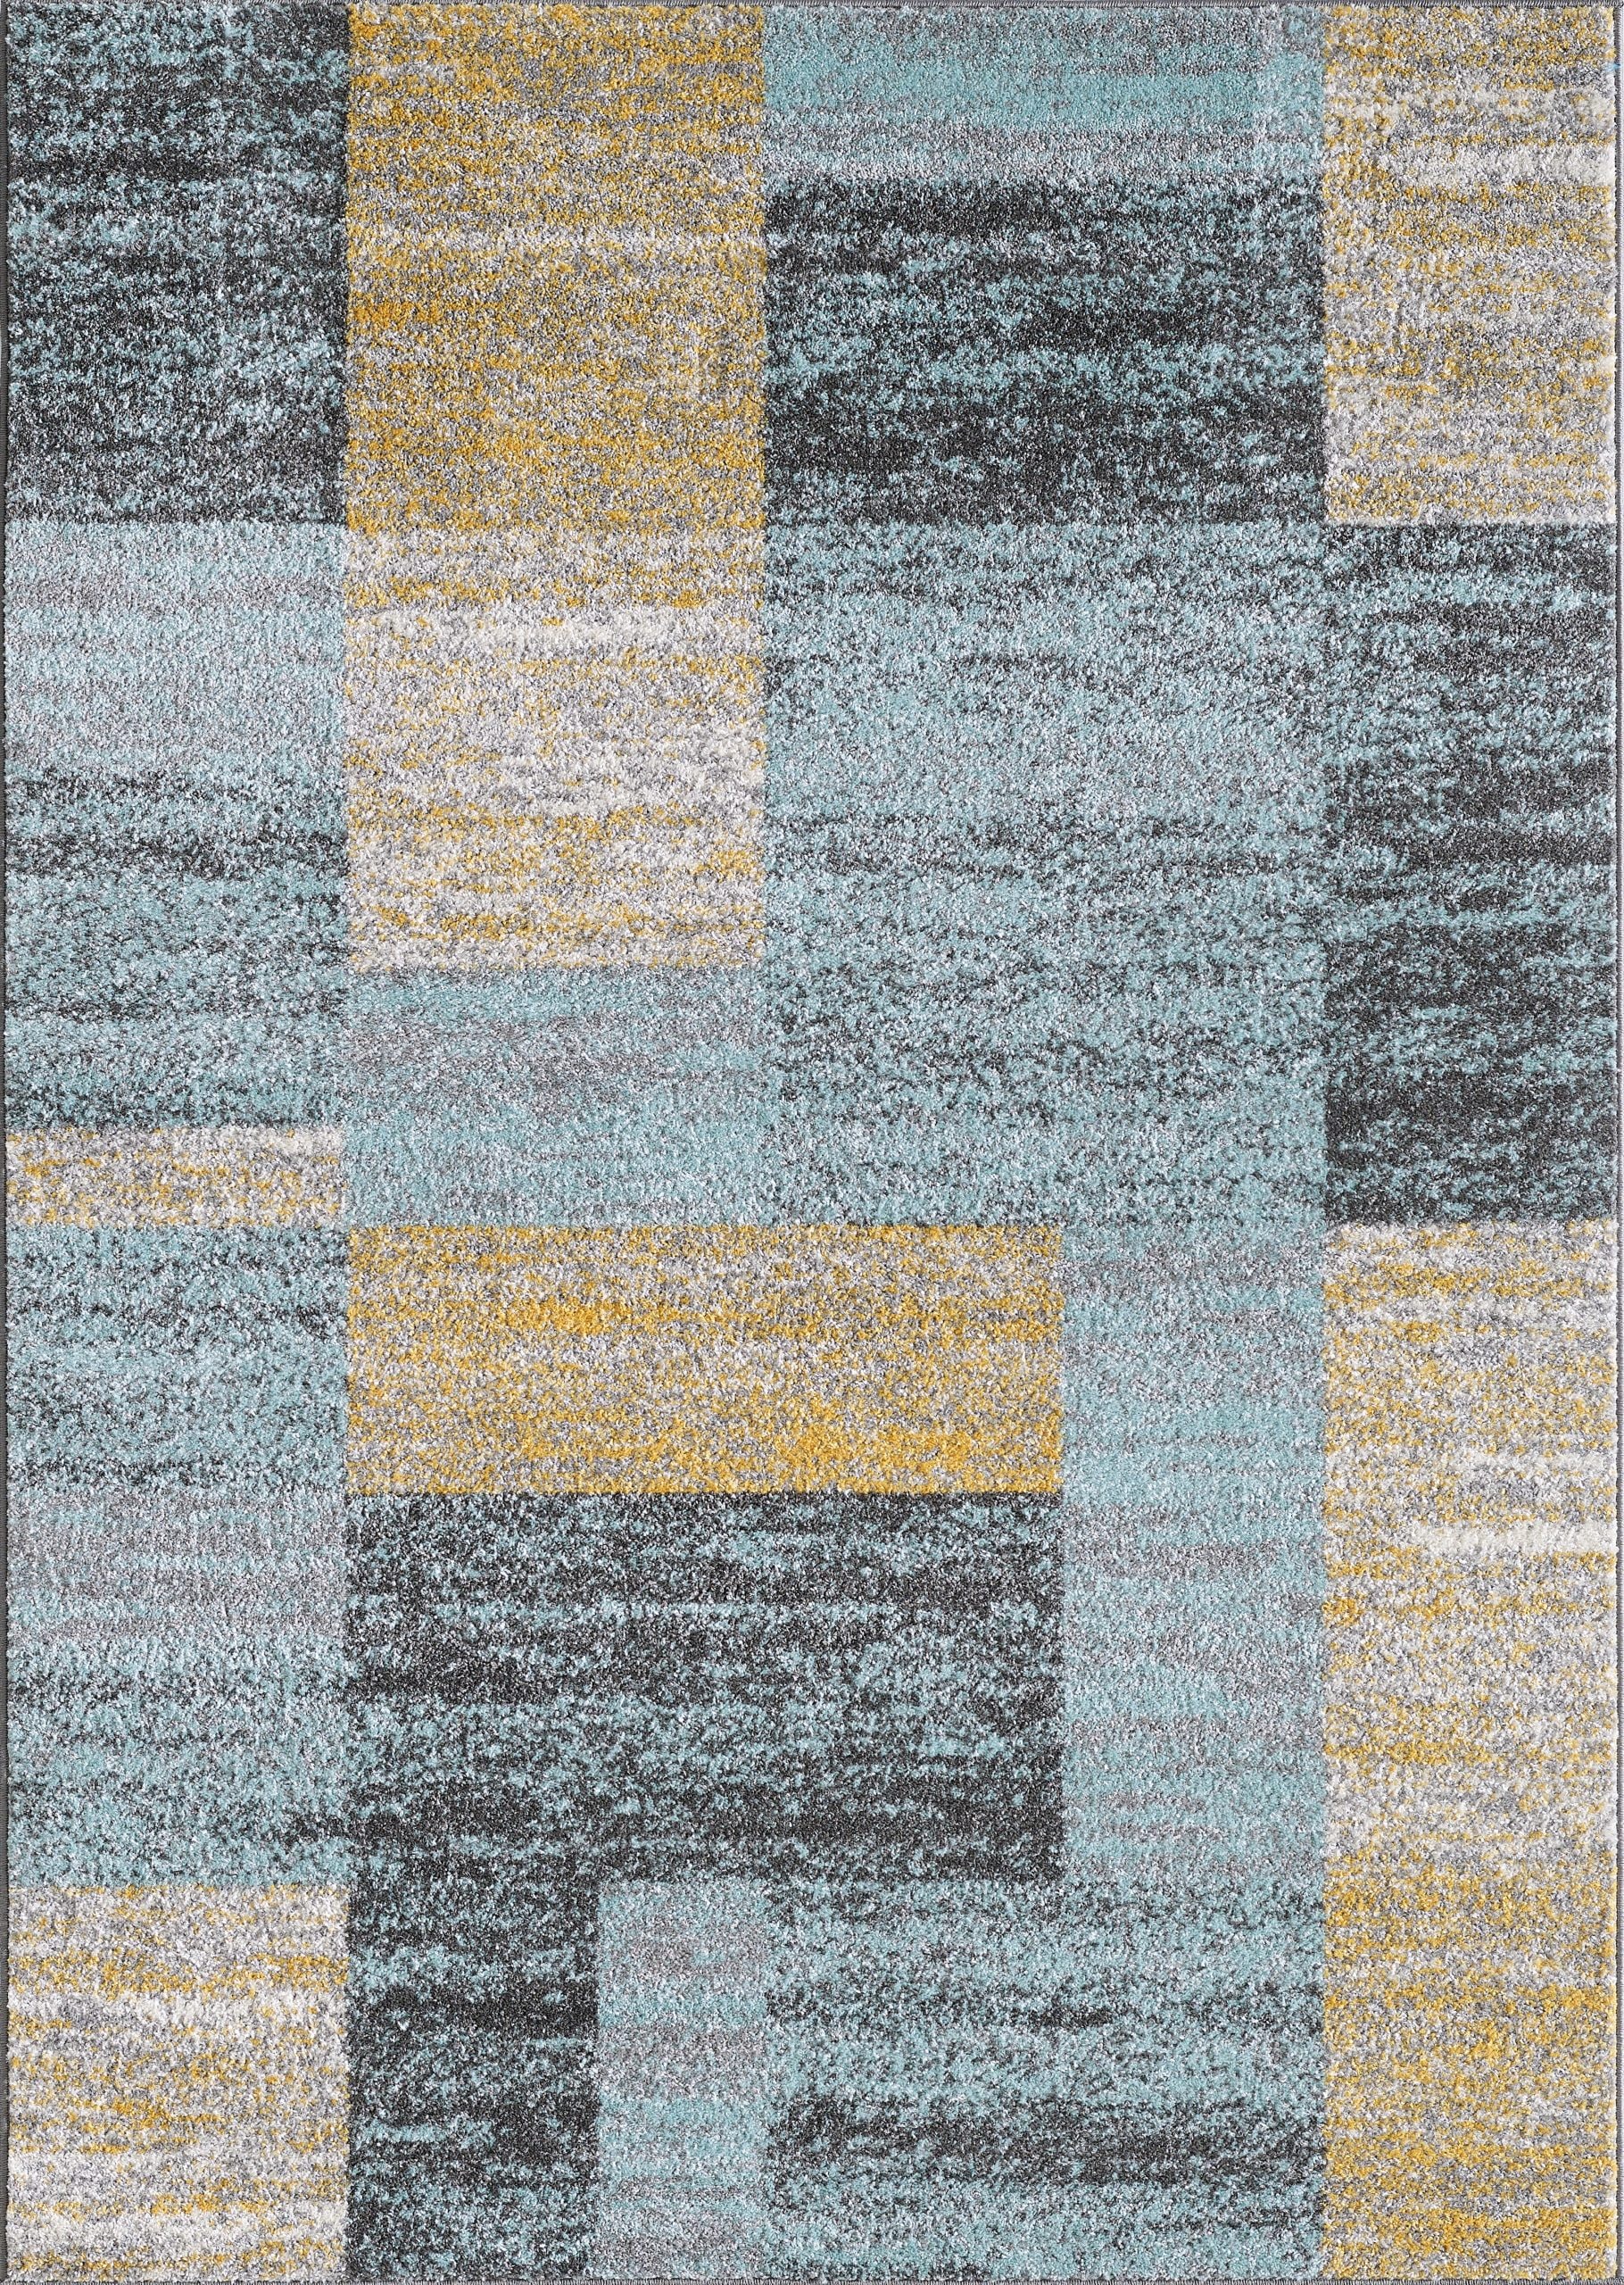 Teal Blue Ochre Yellow Paint Stroke Living Room Rugs Soft Warm Striped Area Rug 